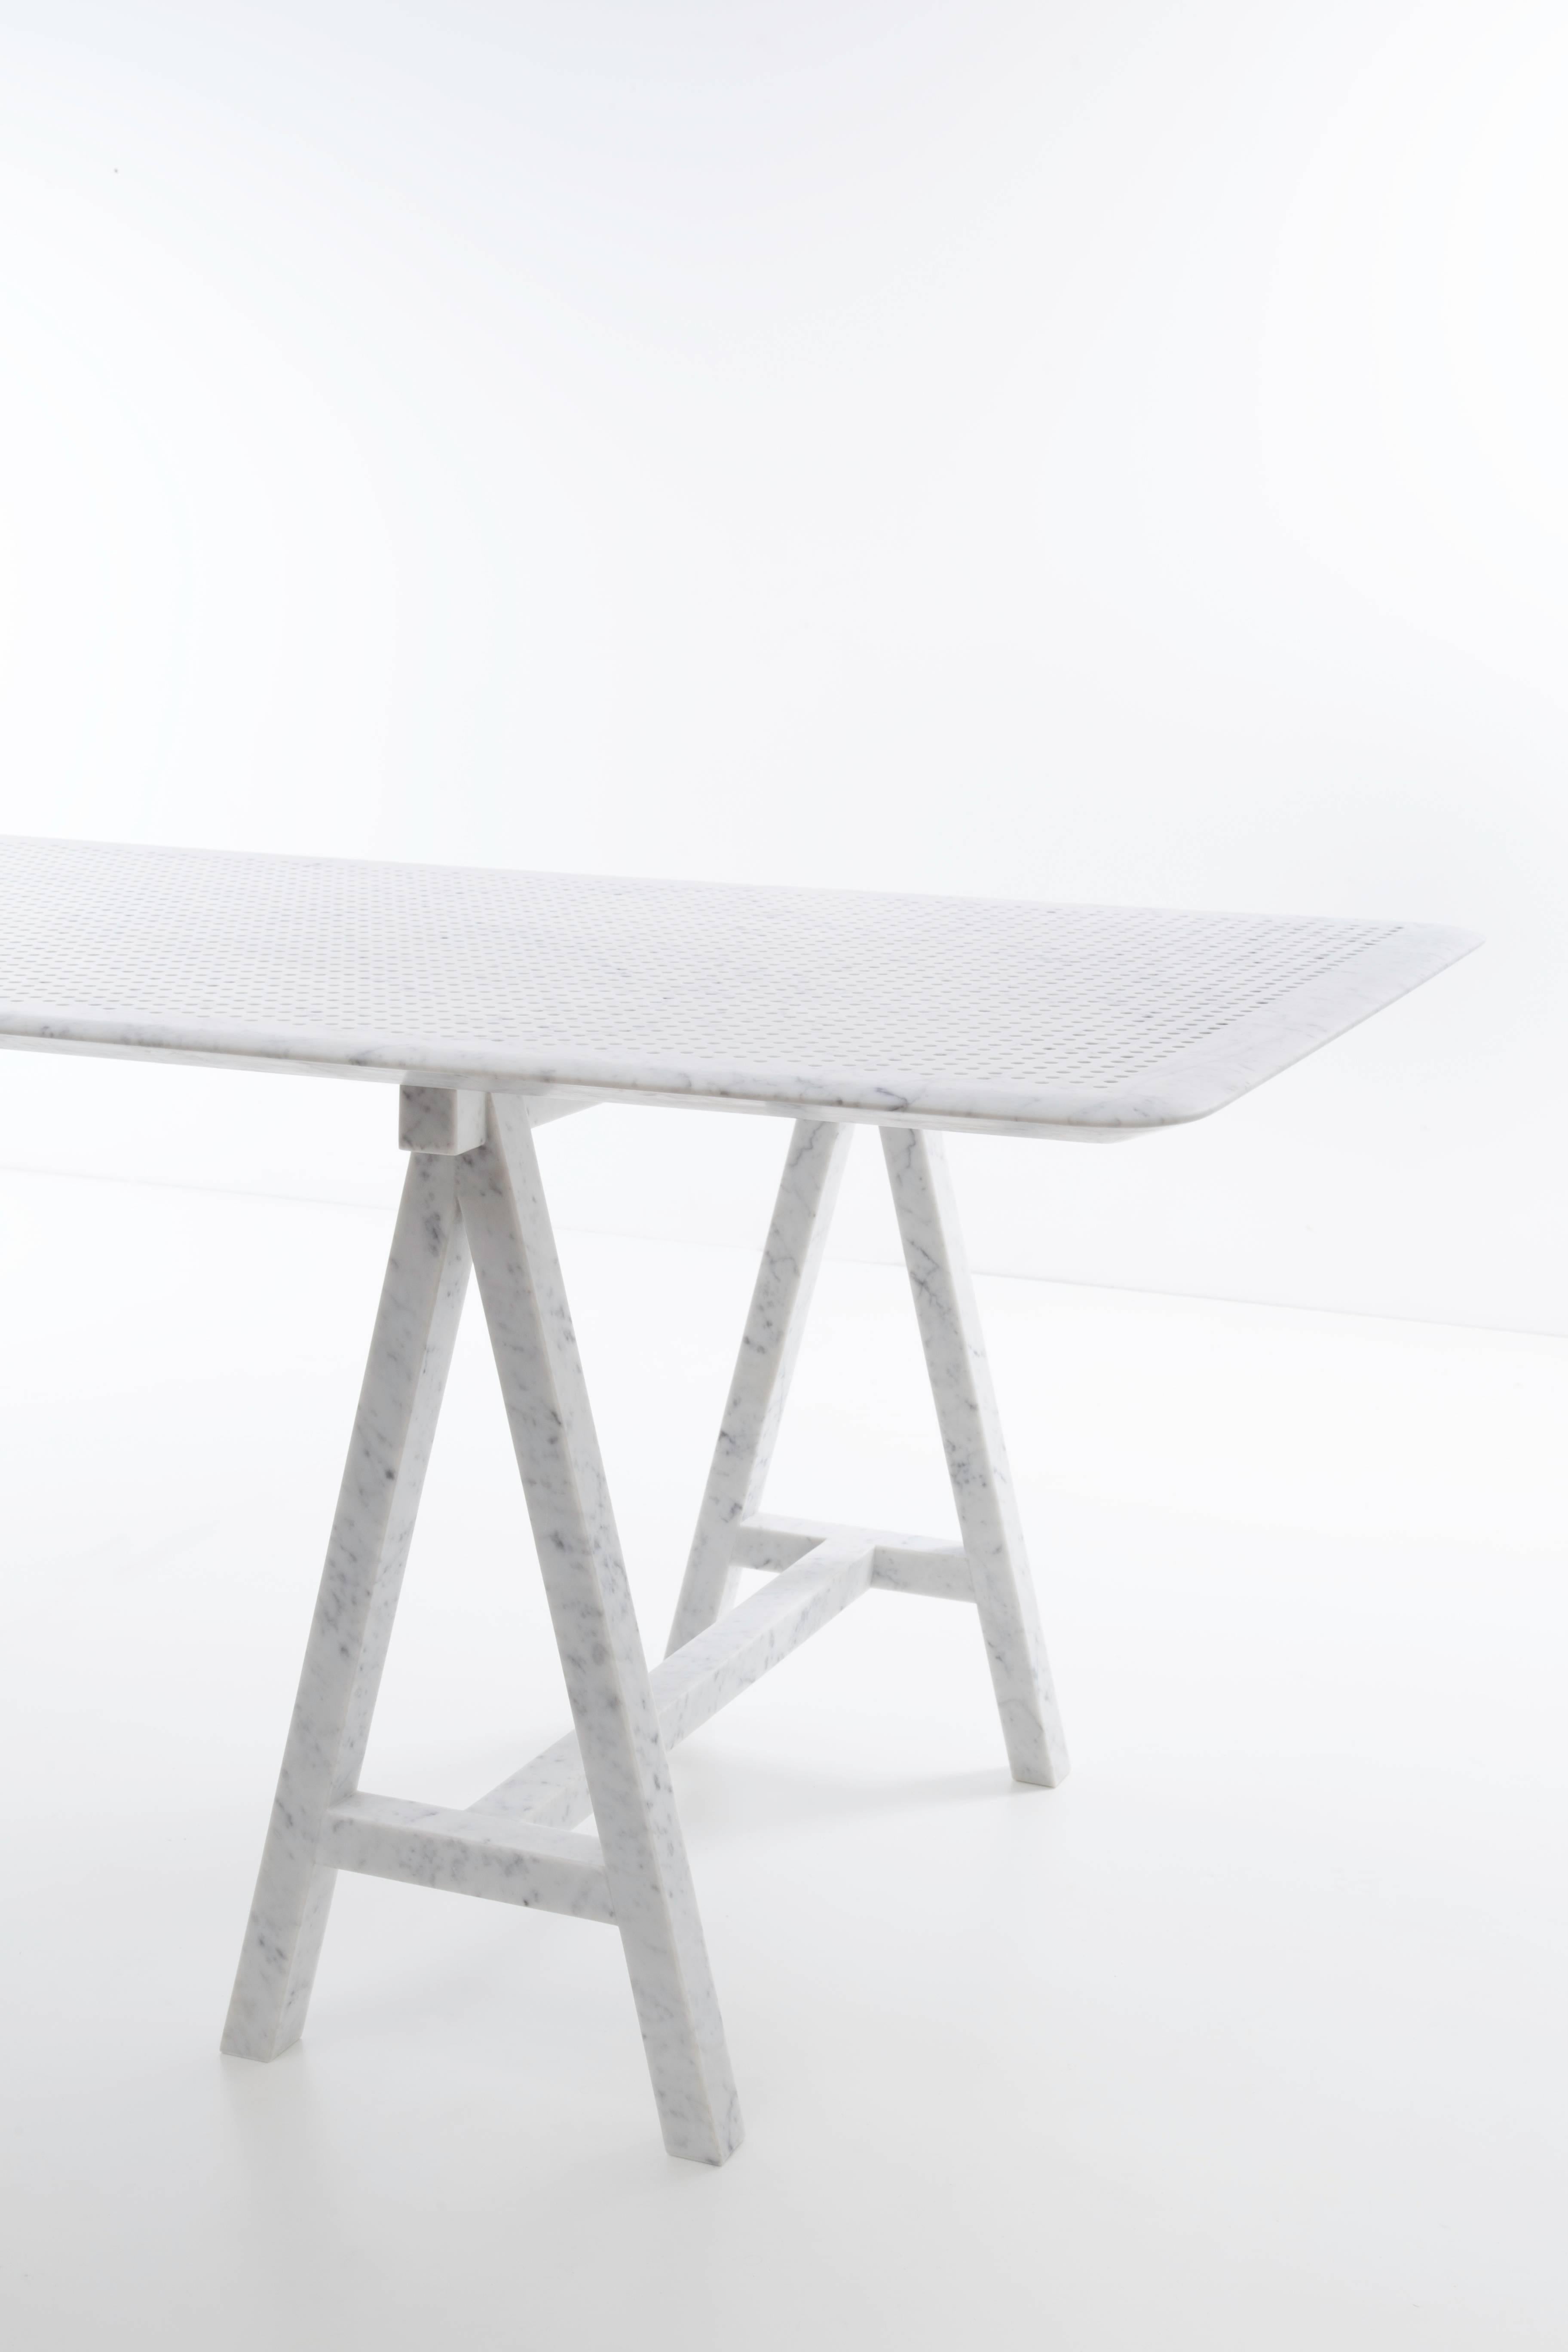 The project led by Normal Studio and Marbrerie d’Art Caudron is based on a research of greatness and lightness. This table consists of a plate in one piece: its dimensions were determined by the biggest size of a beautiful white Carrara marble slab,